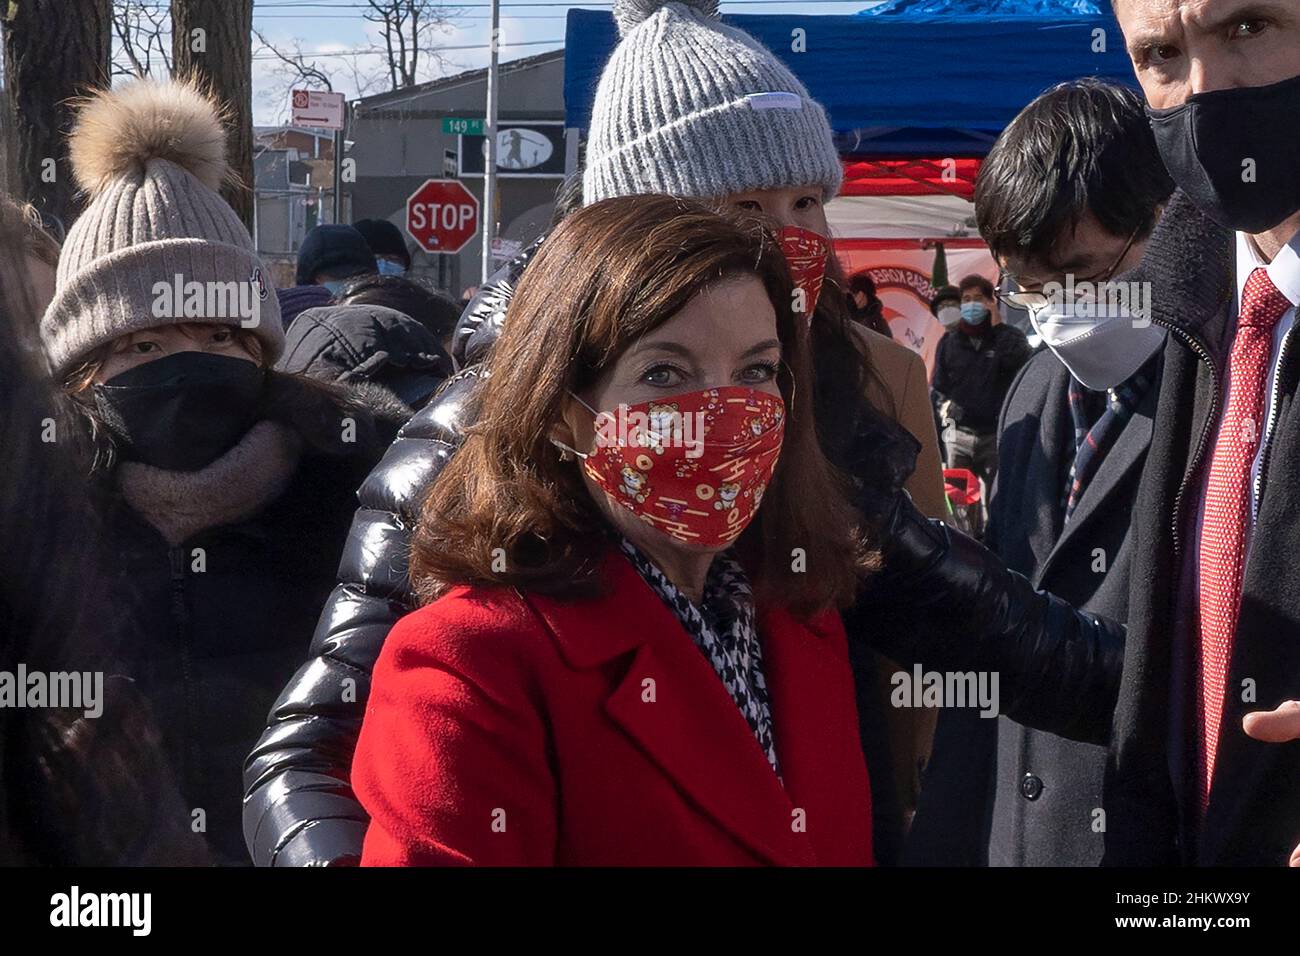 NEW YORK, NEW YORK - FEBRUARY 05:  New York Governor Kathy Hochul participates in the Korean American Association of Greater New York food giveaway on February 5, 2022 in Queens Borough of New York City.  The Korean American Association of Greater New York celebrates the Lunar New Year by donating food and PPE to 1,000 families in need. Stock Photo